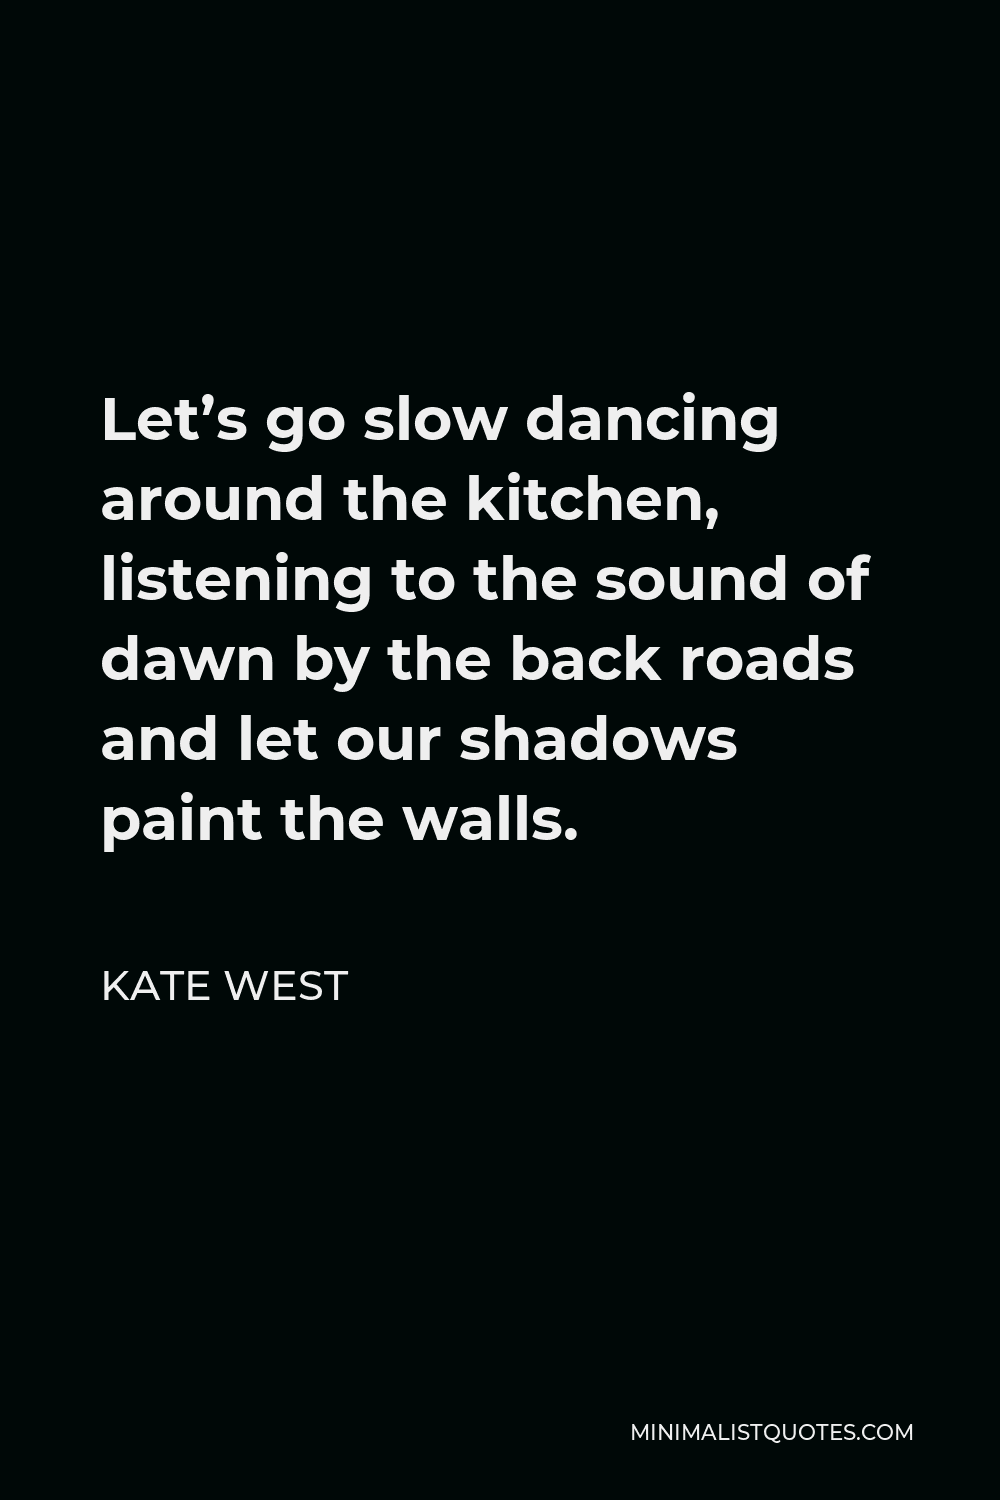 Kate West Quote - Let’s go slow dancing around the kitchen, listening to the sound of dawn by the back roads and let our shadows paint the walls.